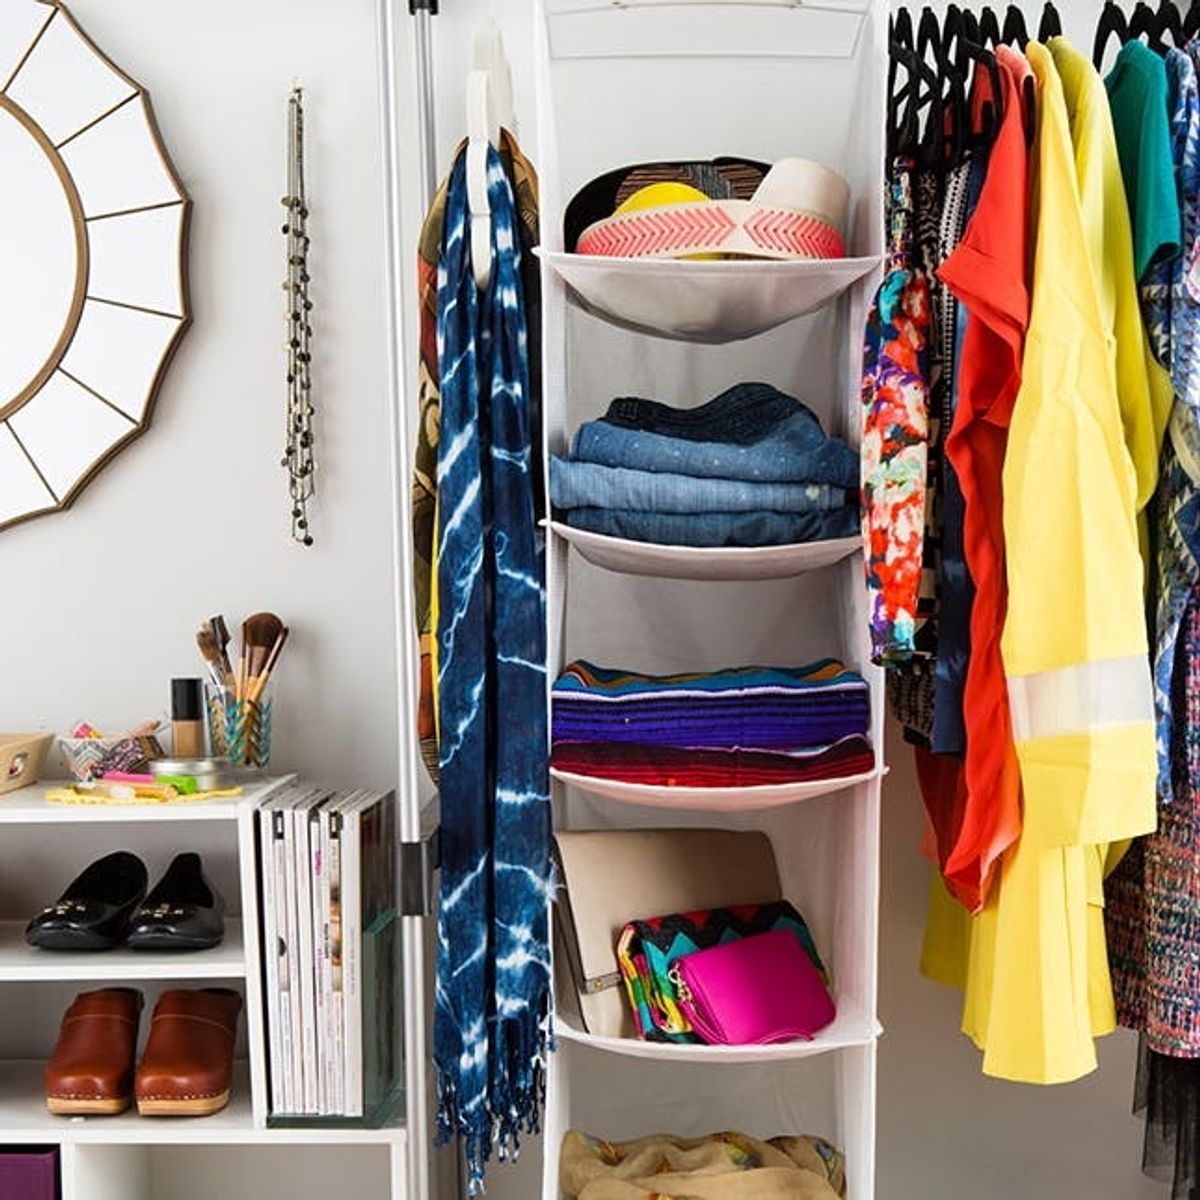 12 Must-Haves for Making Your Own DIY Closet